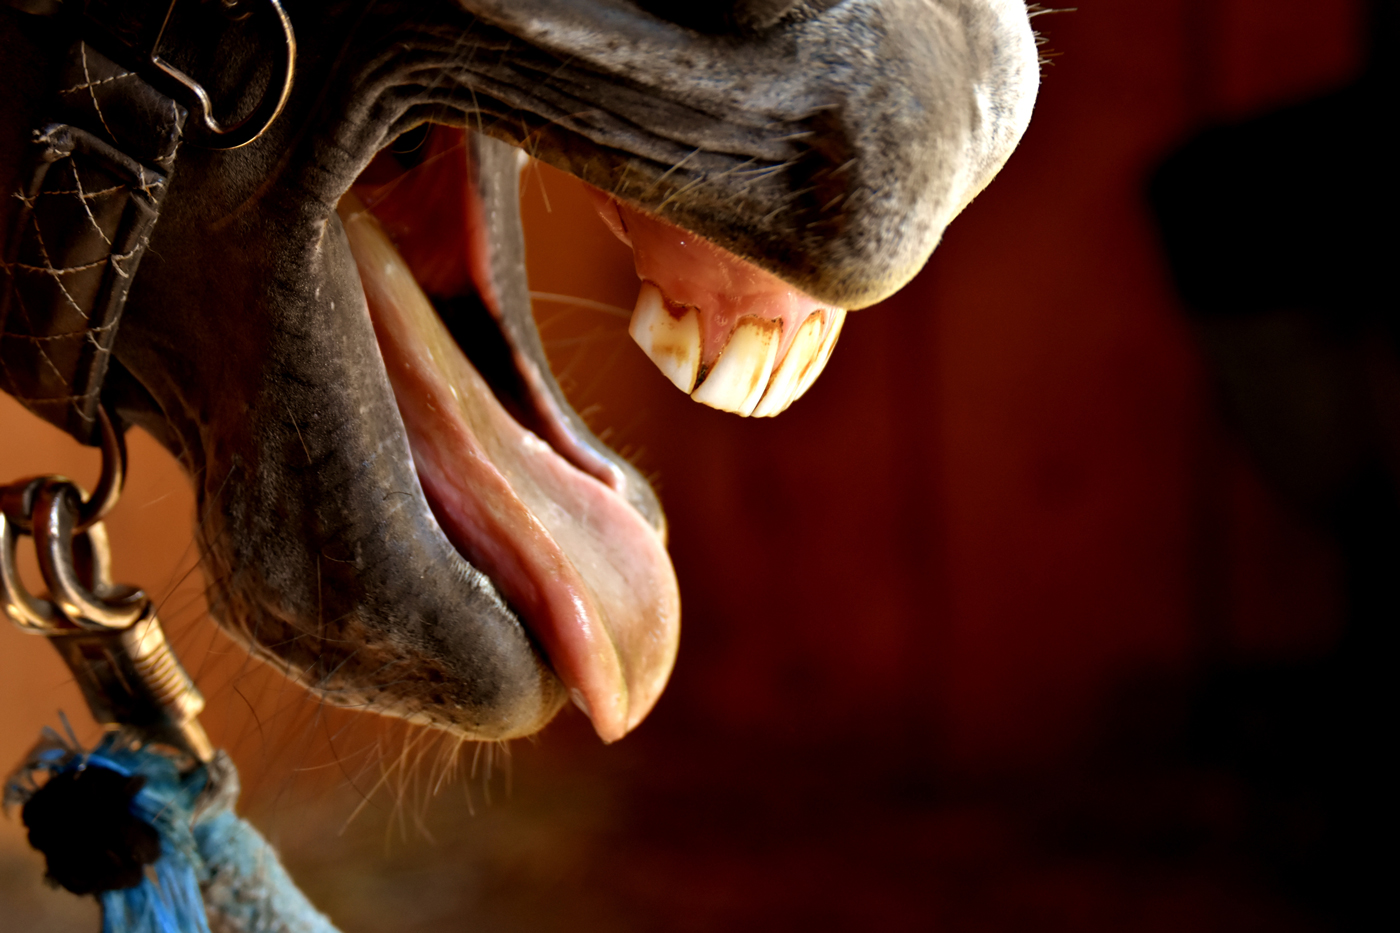 A horse with its mouth open in a stable with its tongue out